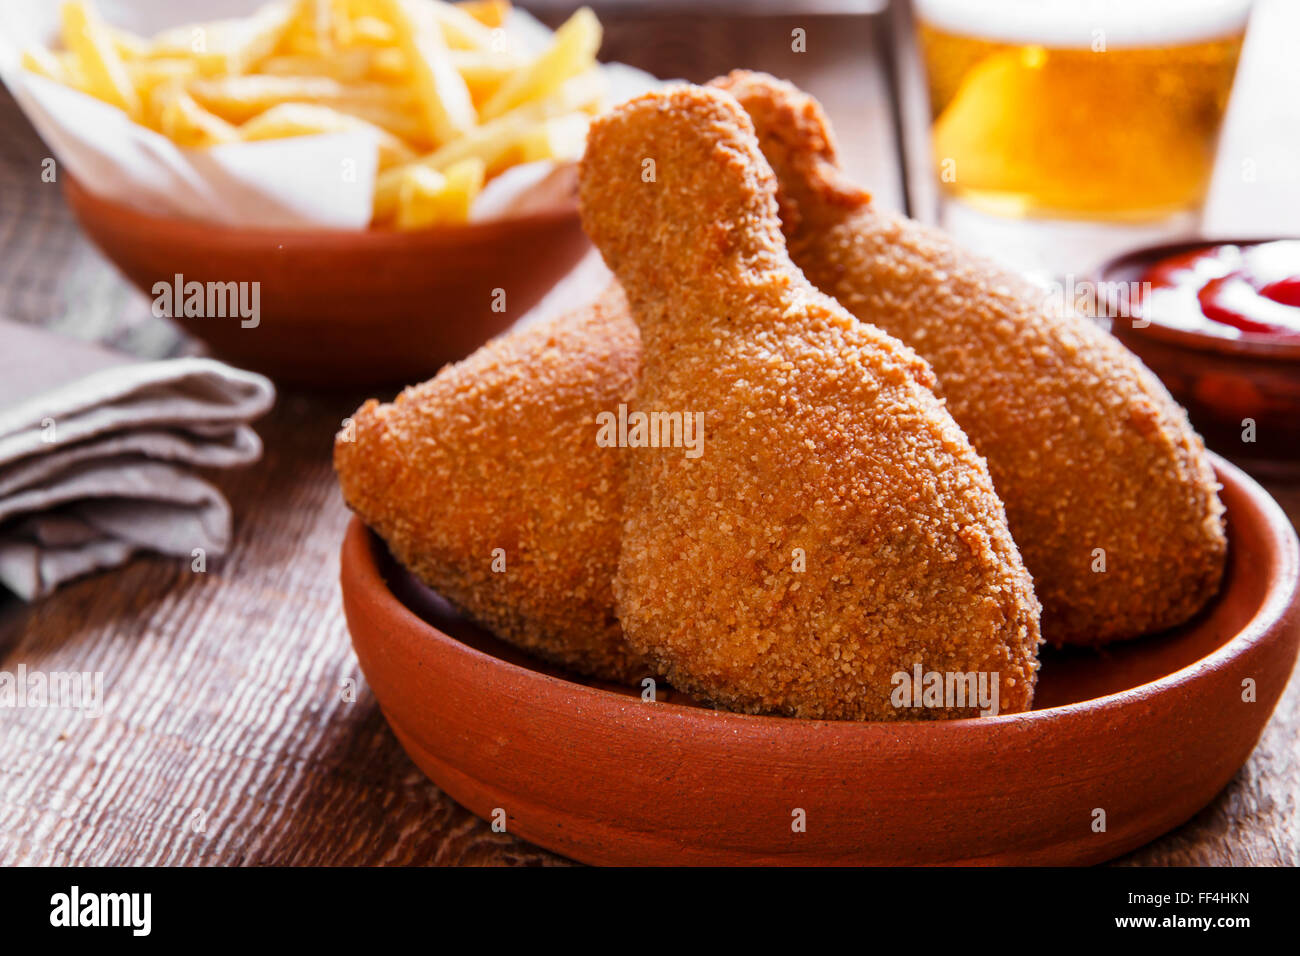 fried chicken leg in breadcrumbs and french fries Stock Photo